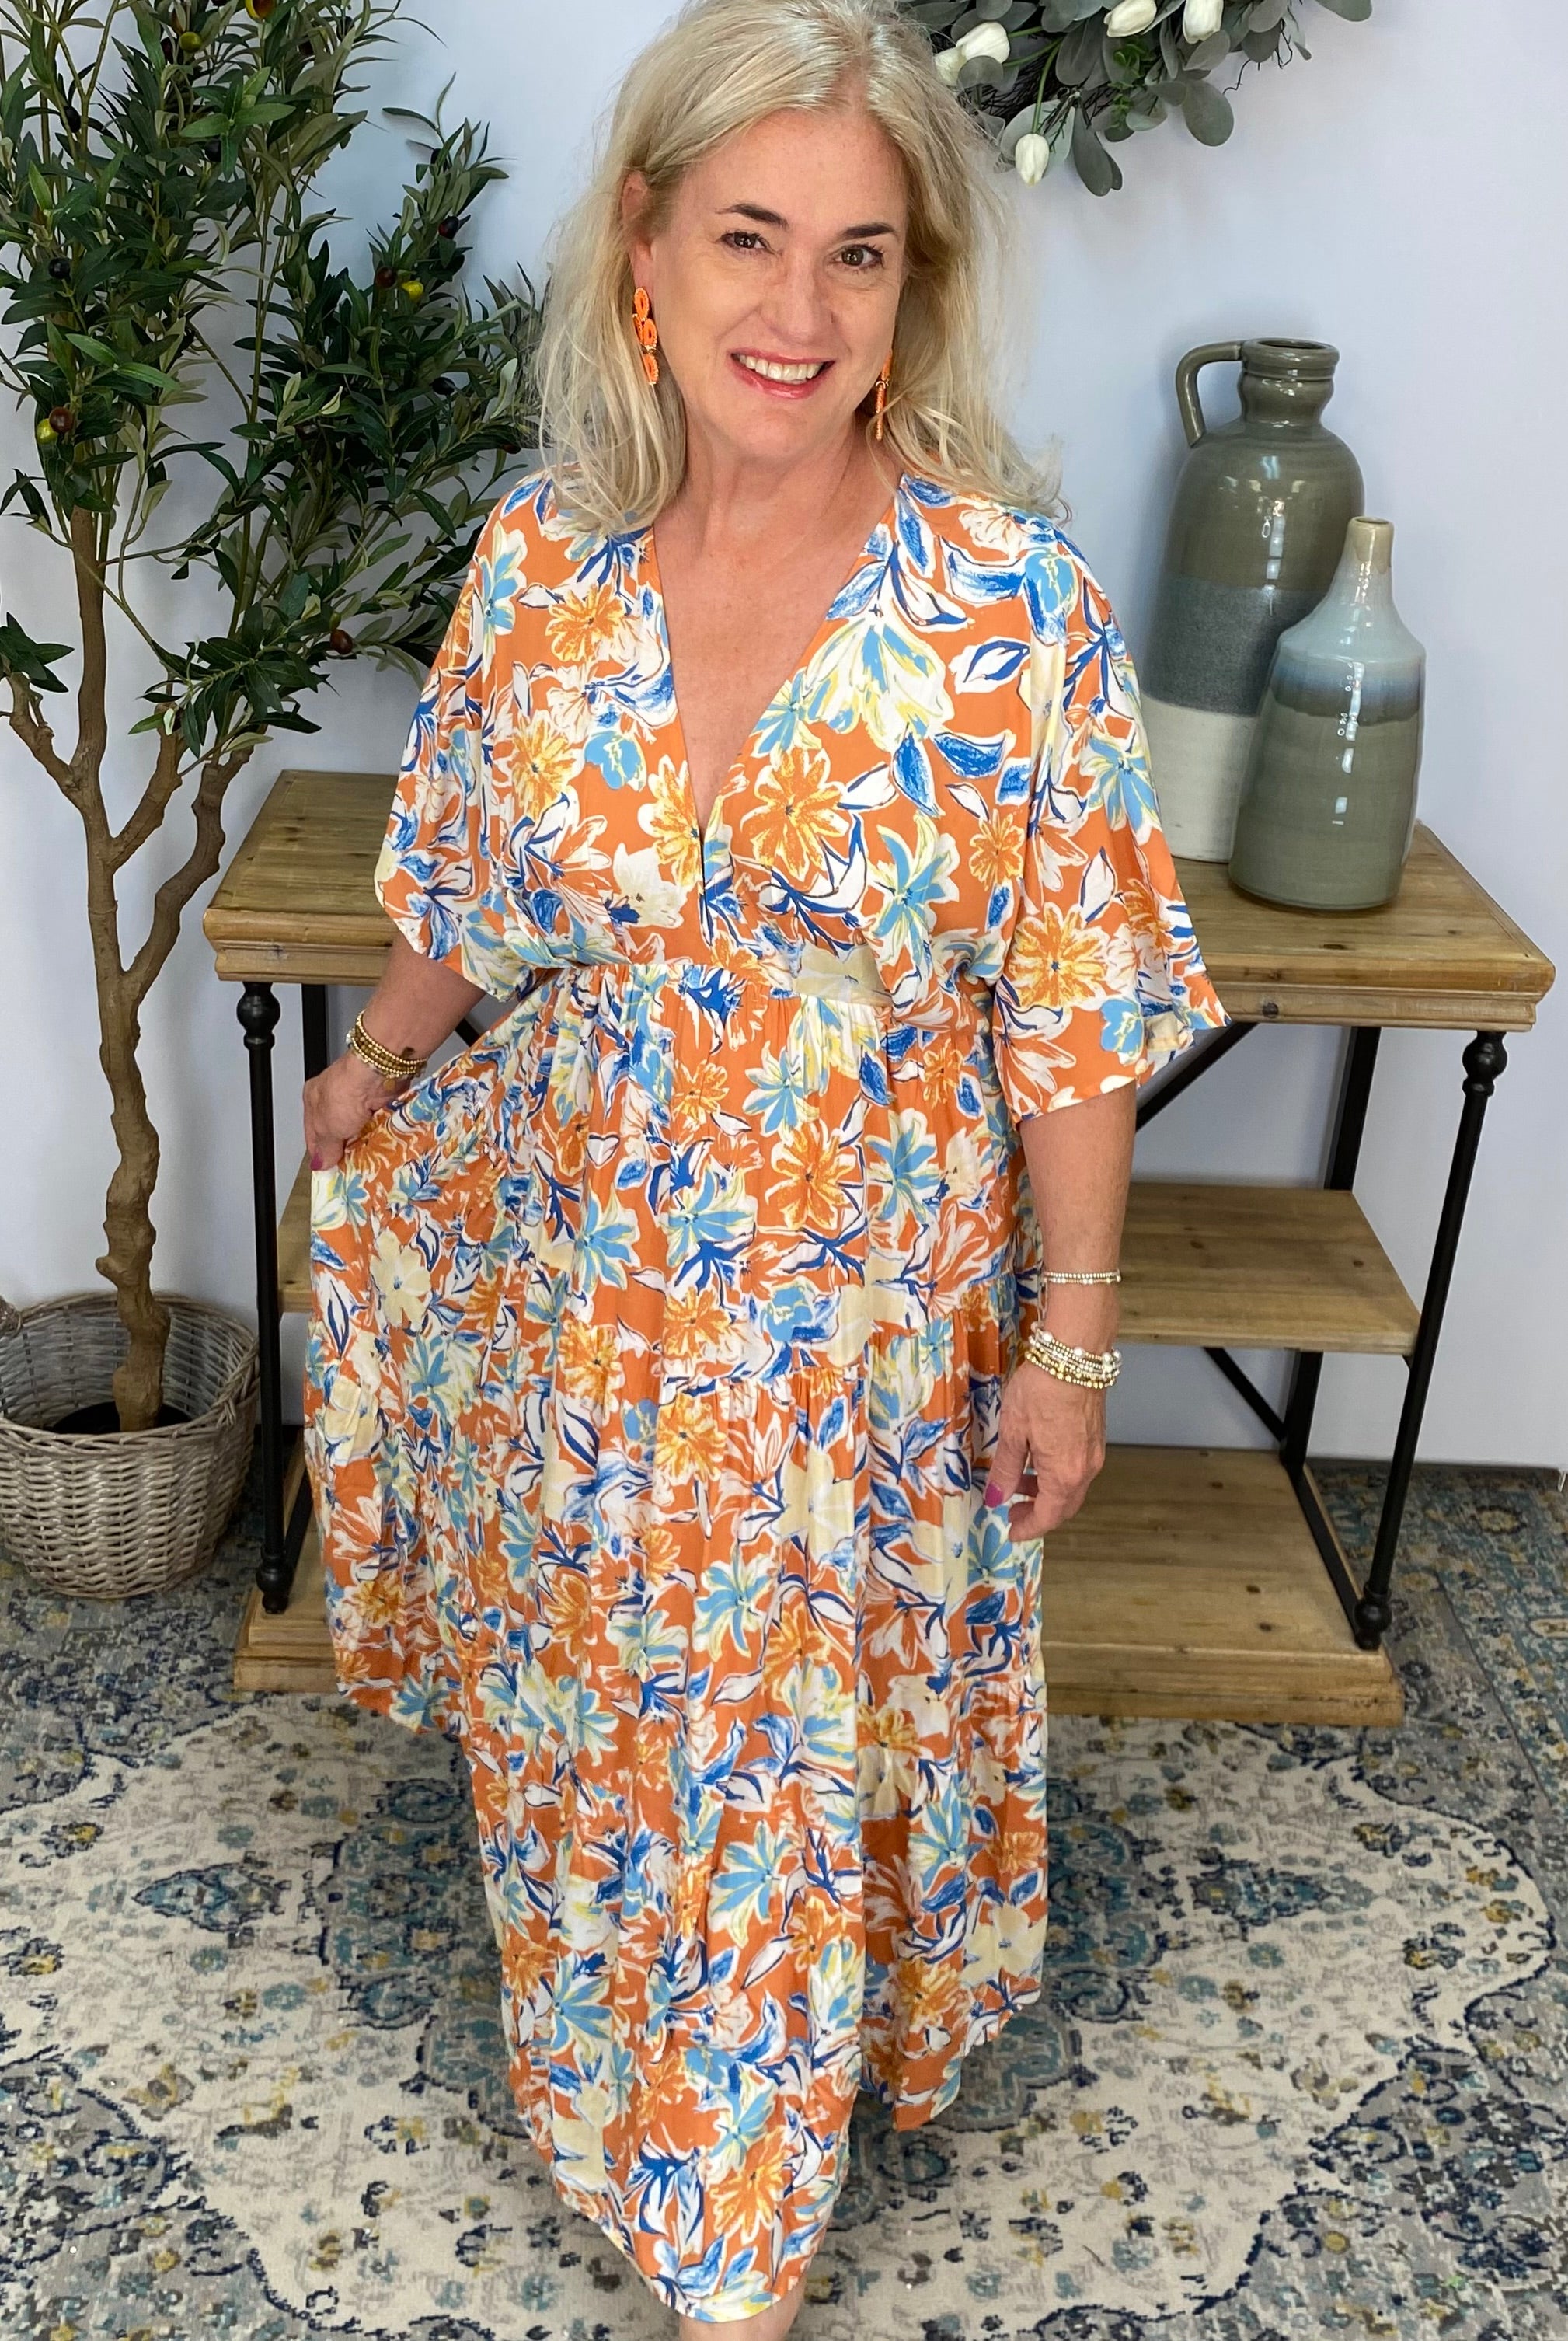 Feeling Beautiful Maxi Dress-180 Dresses-The Lovely Closet-The Lovely Closet, Women's Fashion Boutique in Alexandria, KY